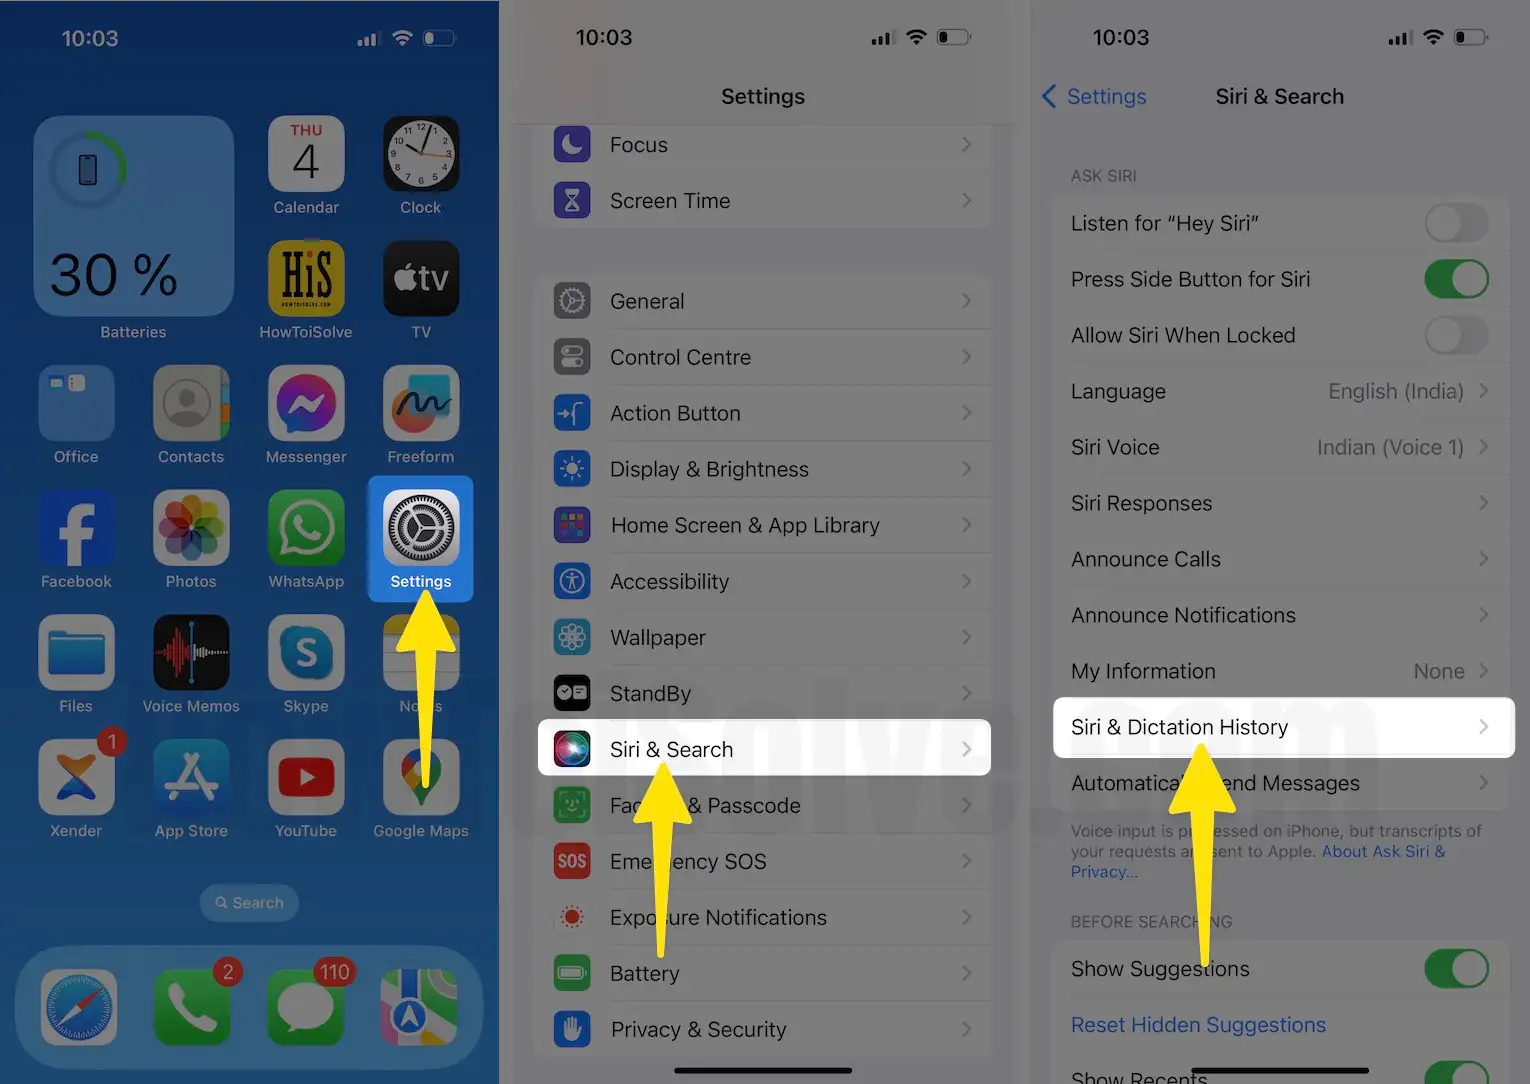 Launch the settings app tap on siri 7 search click Siri & Dictation History on iPhone